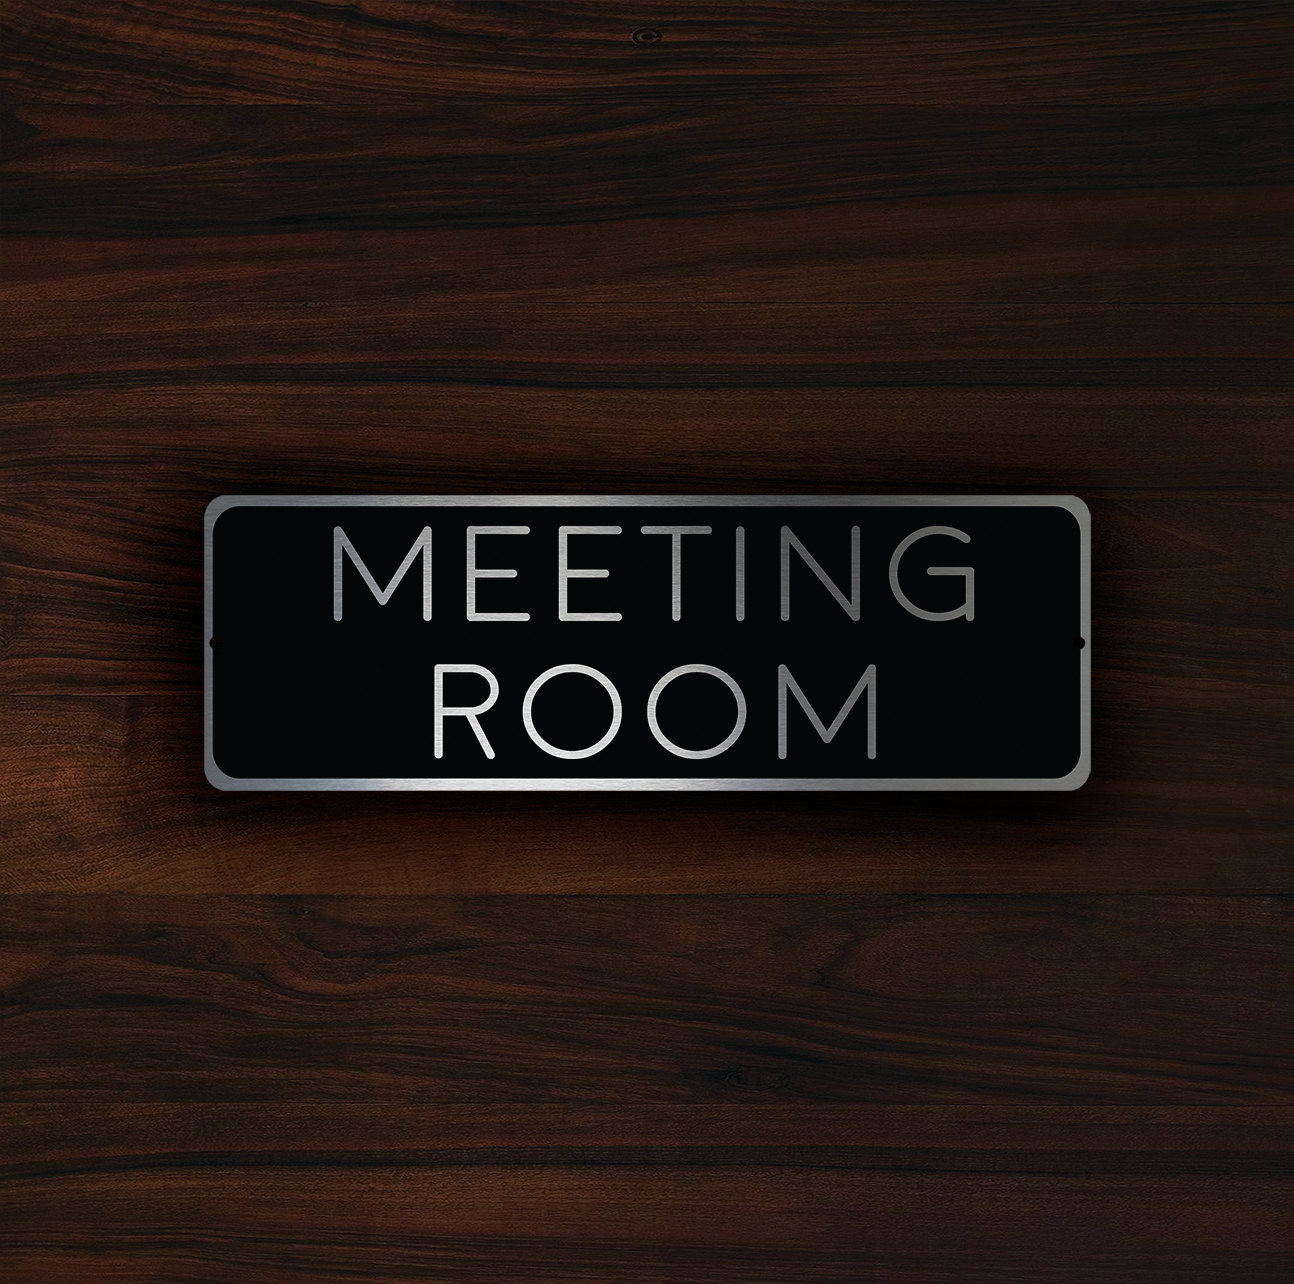 MEETING ROOM SIGN